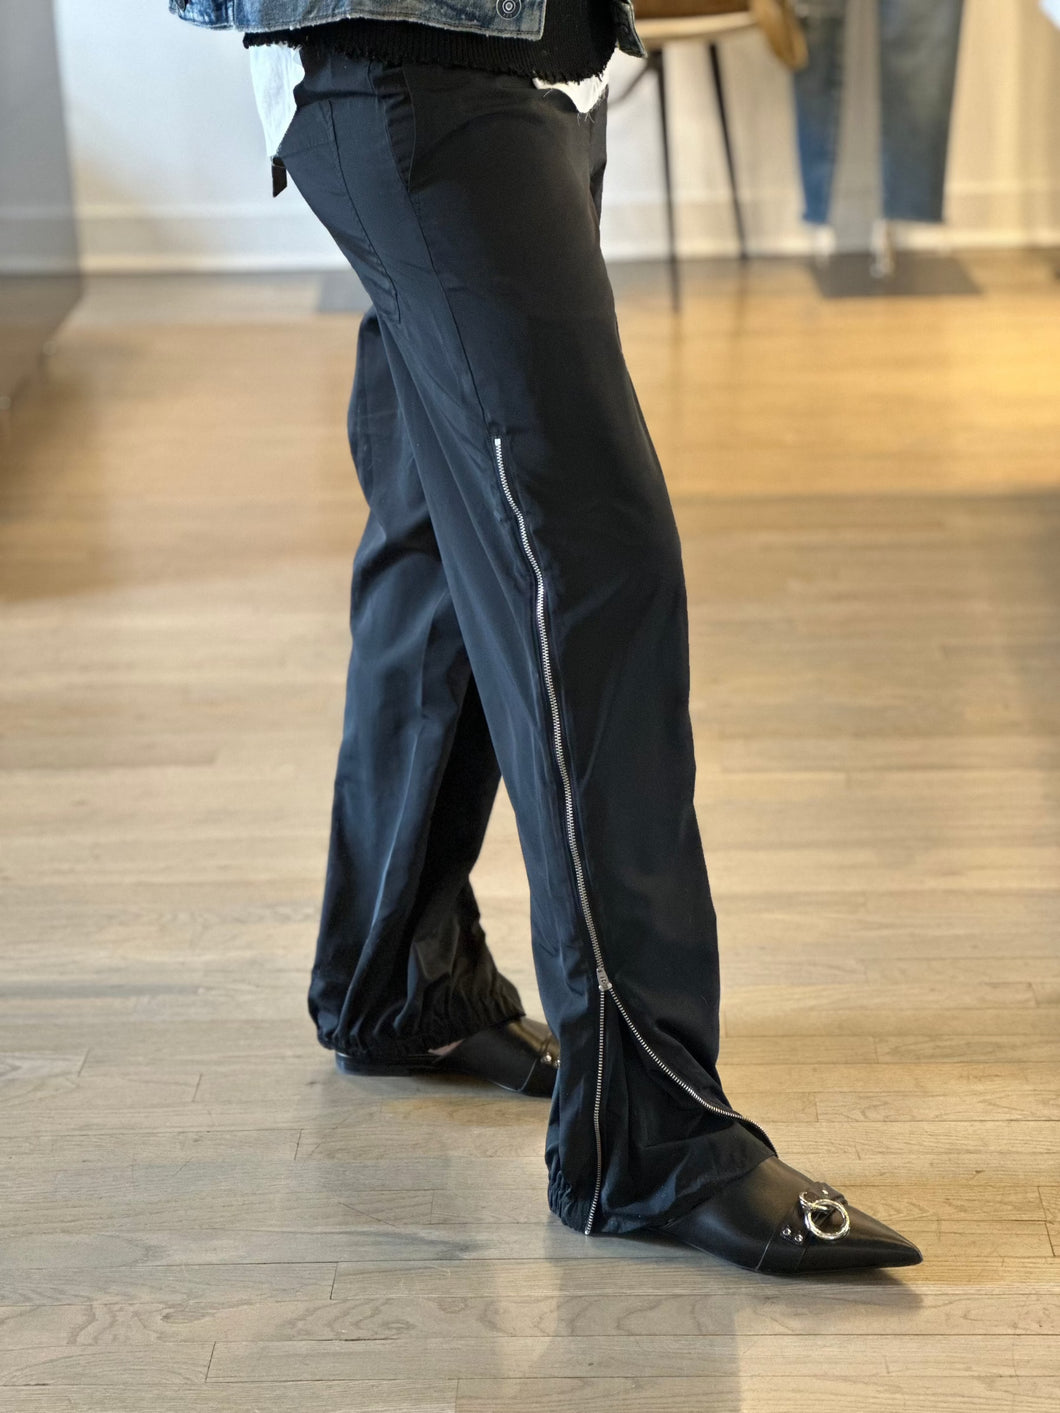 Zippered track pant by Herskind at west2westport.com